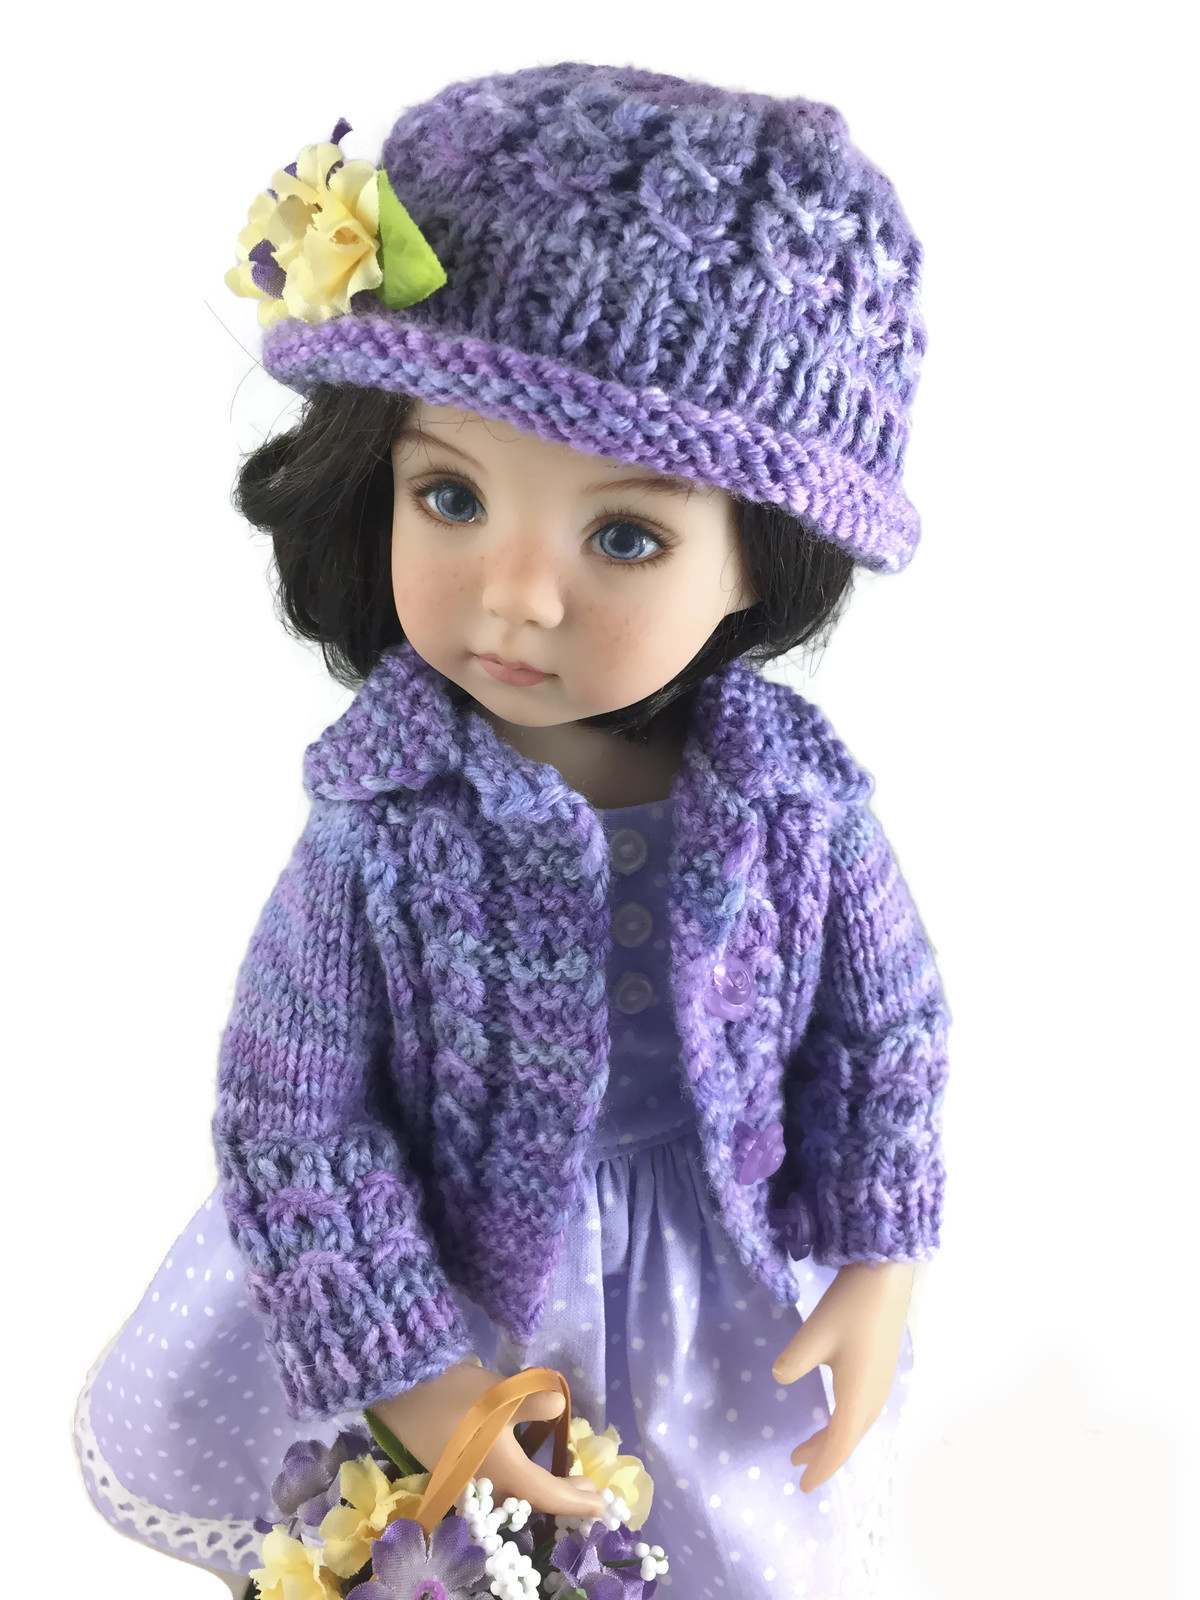 Free Knitting Patterns For Dolls Hats Eyelet Cable Bundle Cardigan And Hat To Fit 13 Inch Dolls Pdf Knitting Pattern